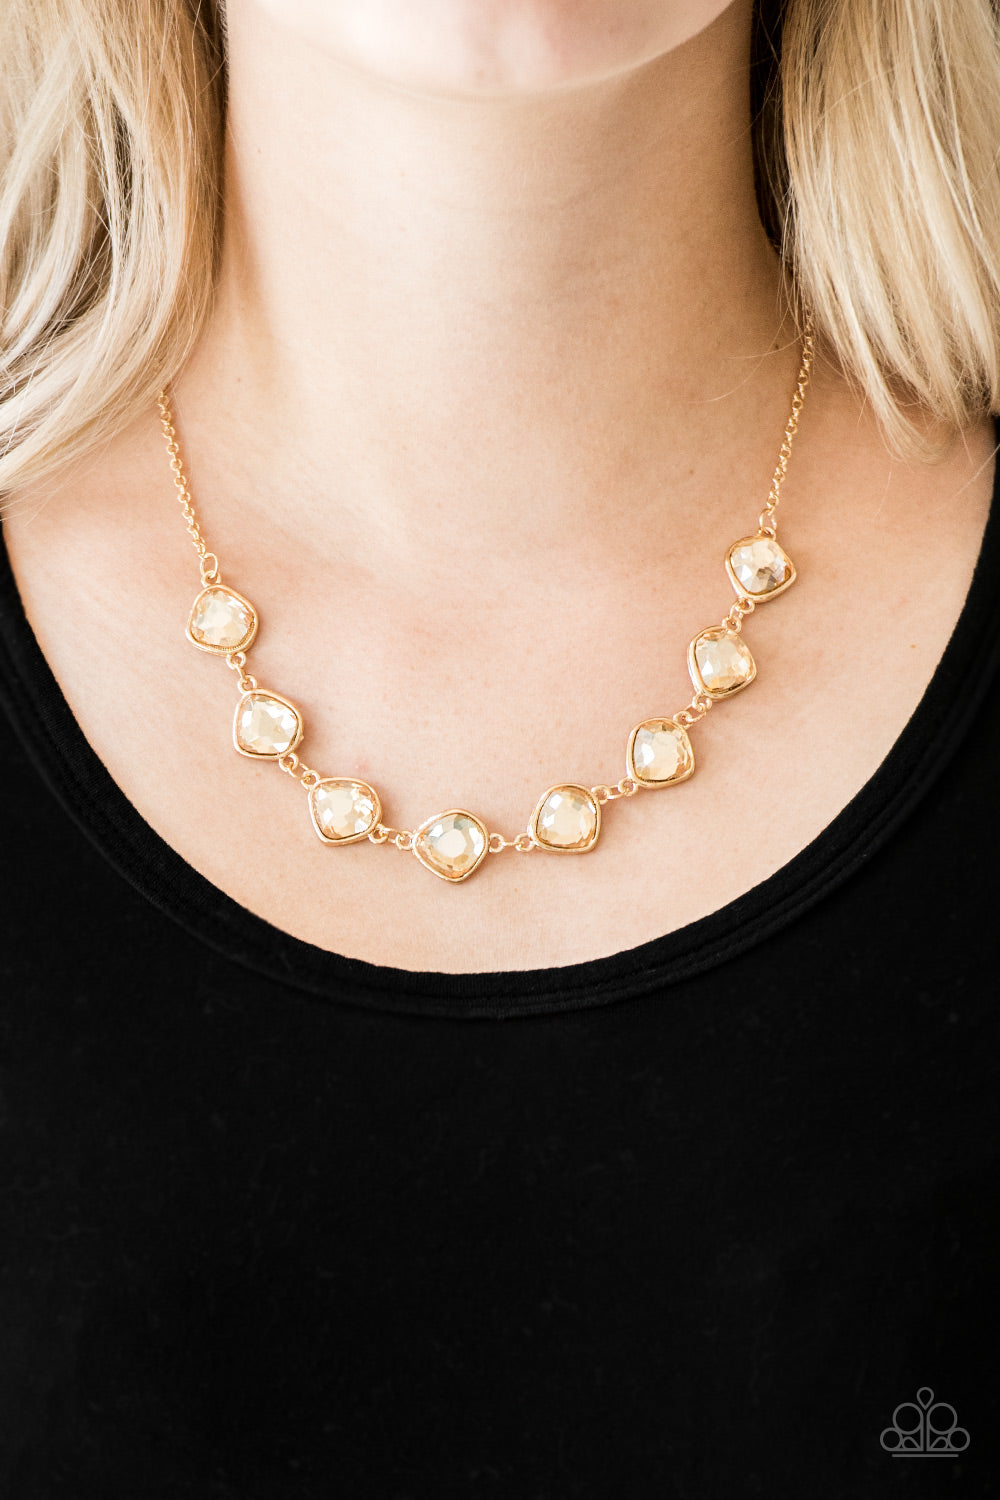 Paparazzi Accessories - The Imperfectionist - Gold Necklace